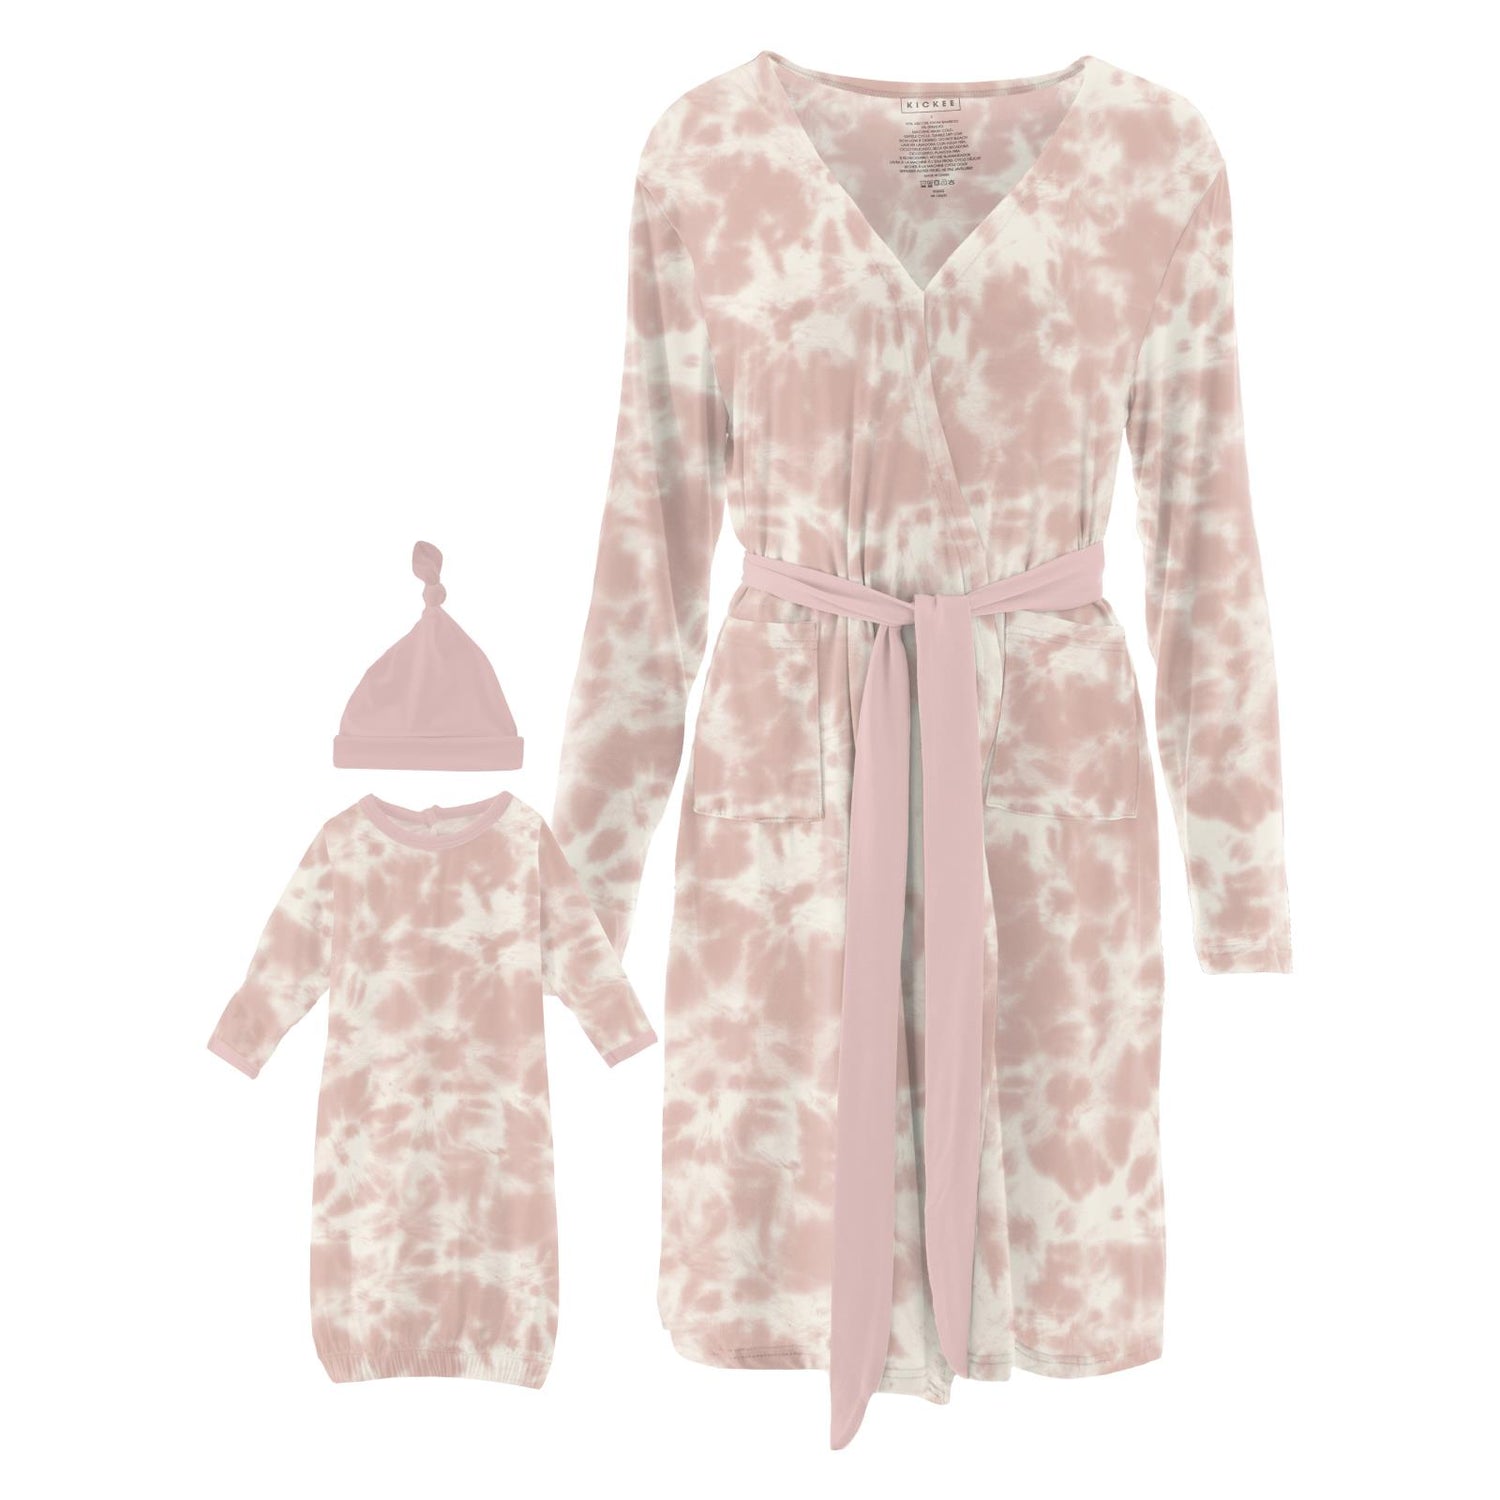 Women's Print Mid Length Lounge Robe & Layette Gown Set in Baby Rose Tie Dye